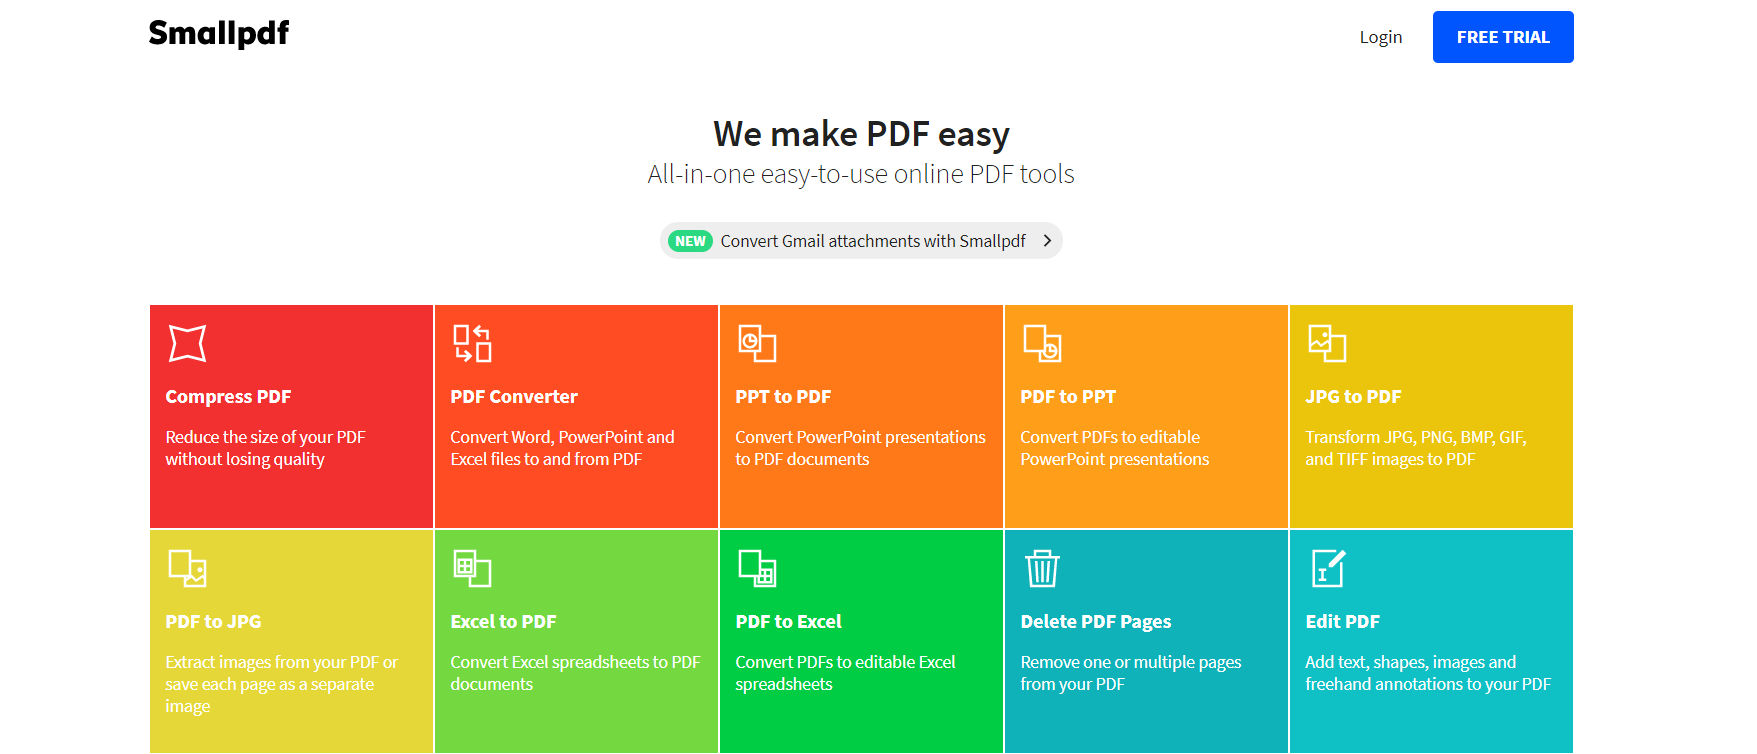 2021] Smallpdf Full Review: Is It Safe to Use?